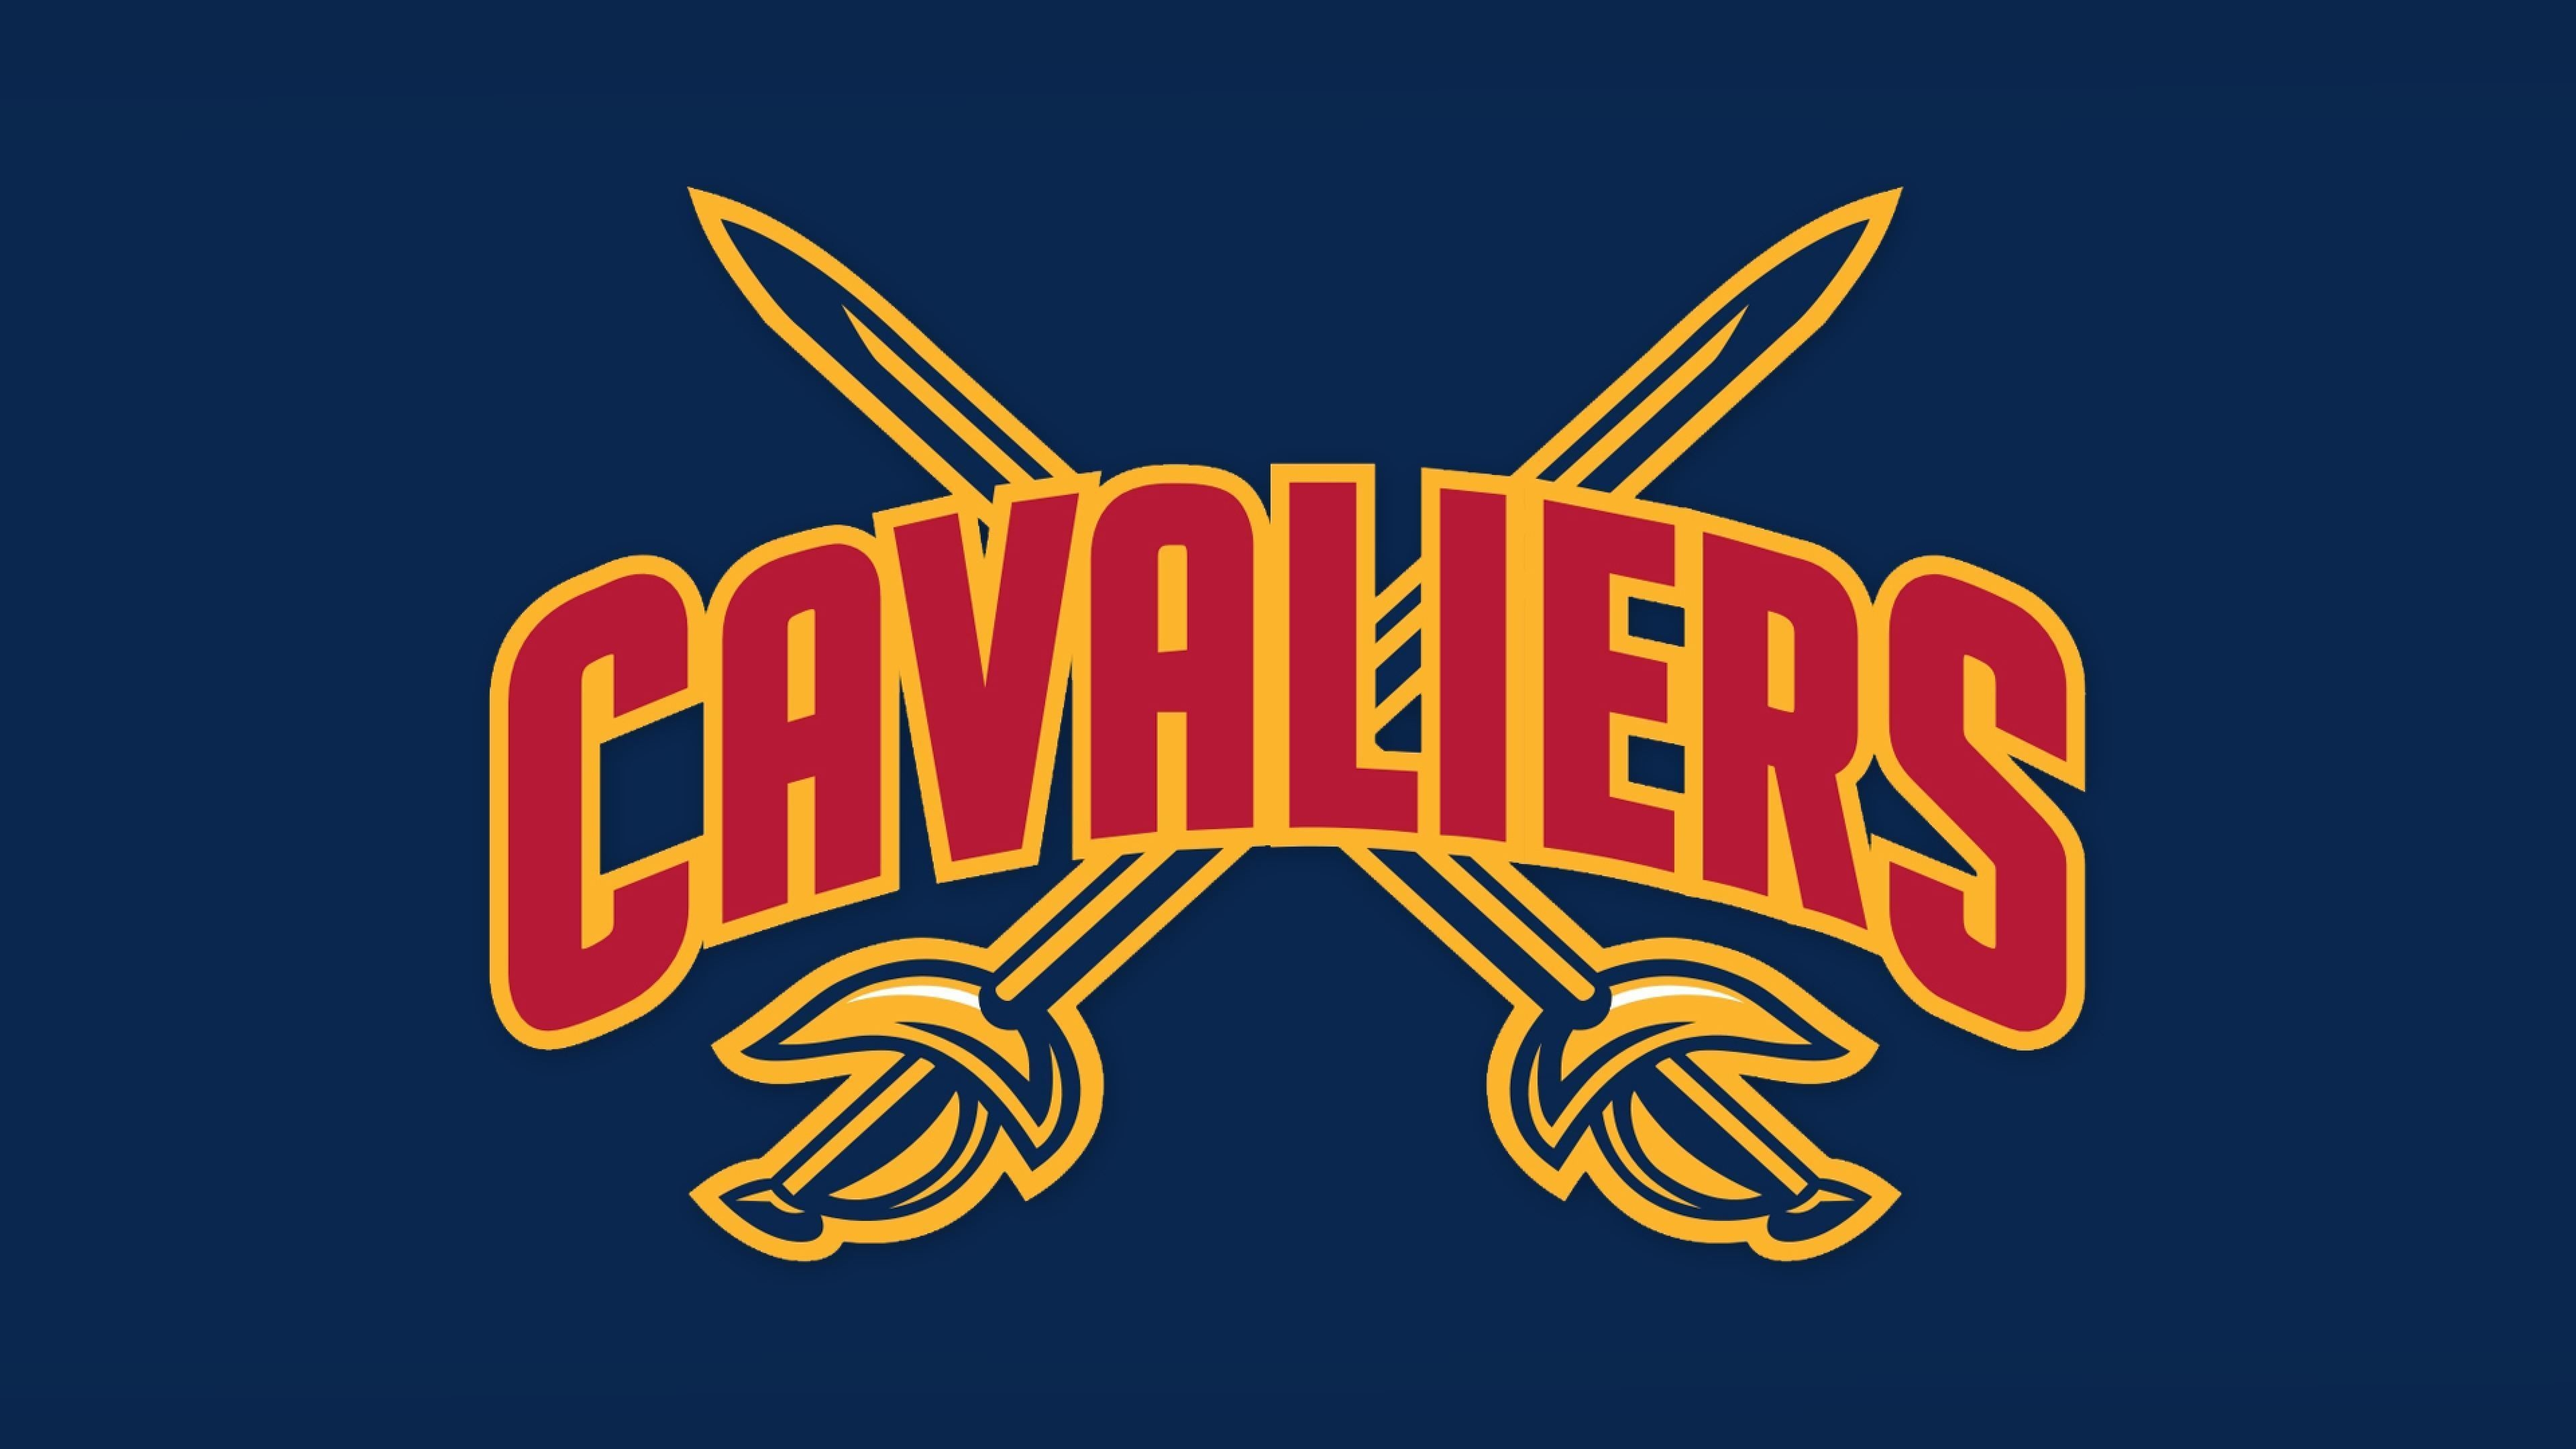 NBA Cleveland Cavaliers Logo for 3840 x 2160 Ultra HD resolution